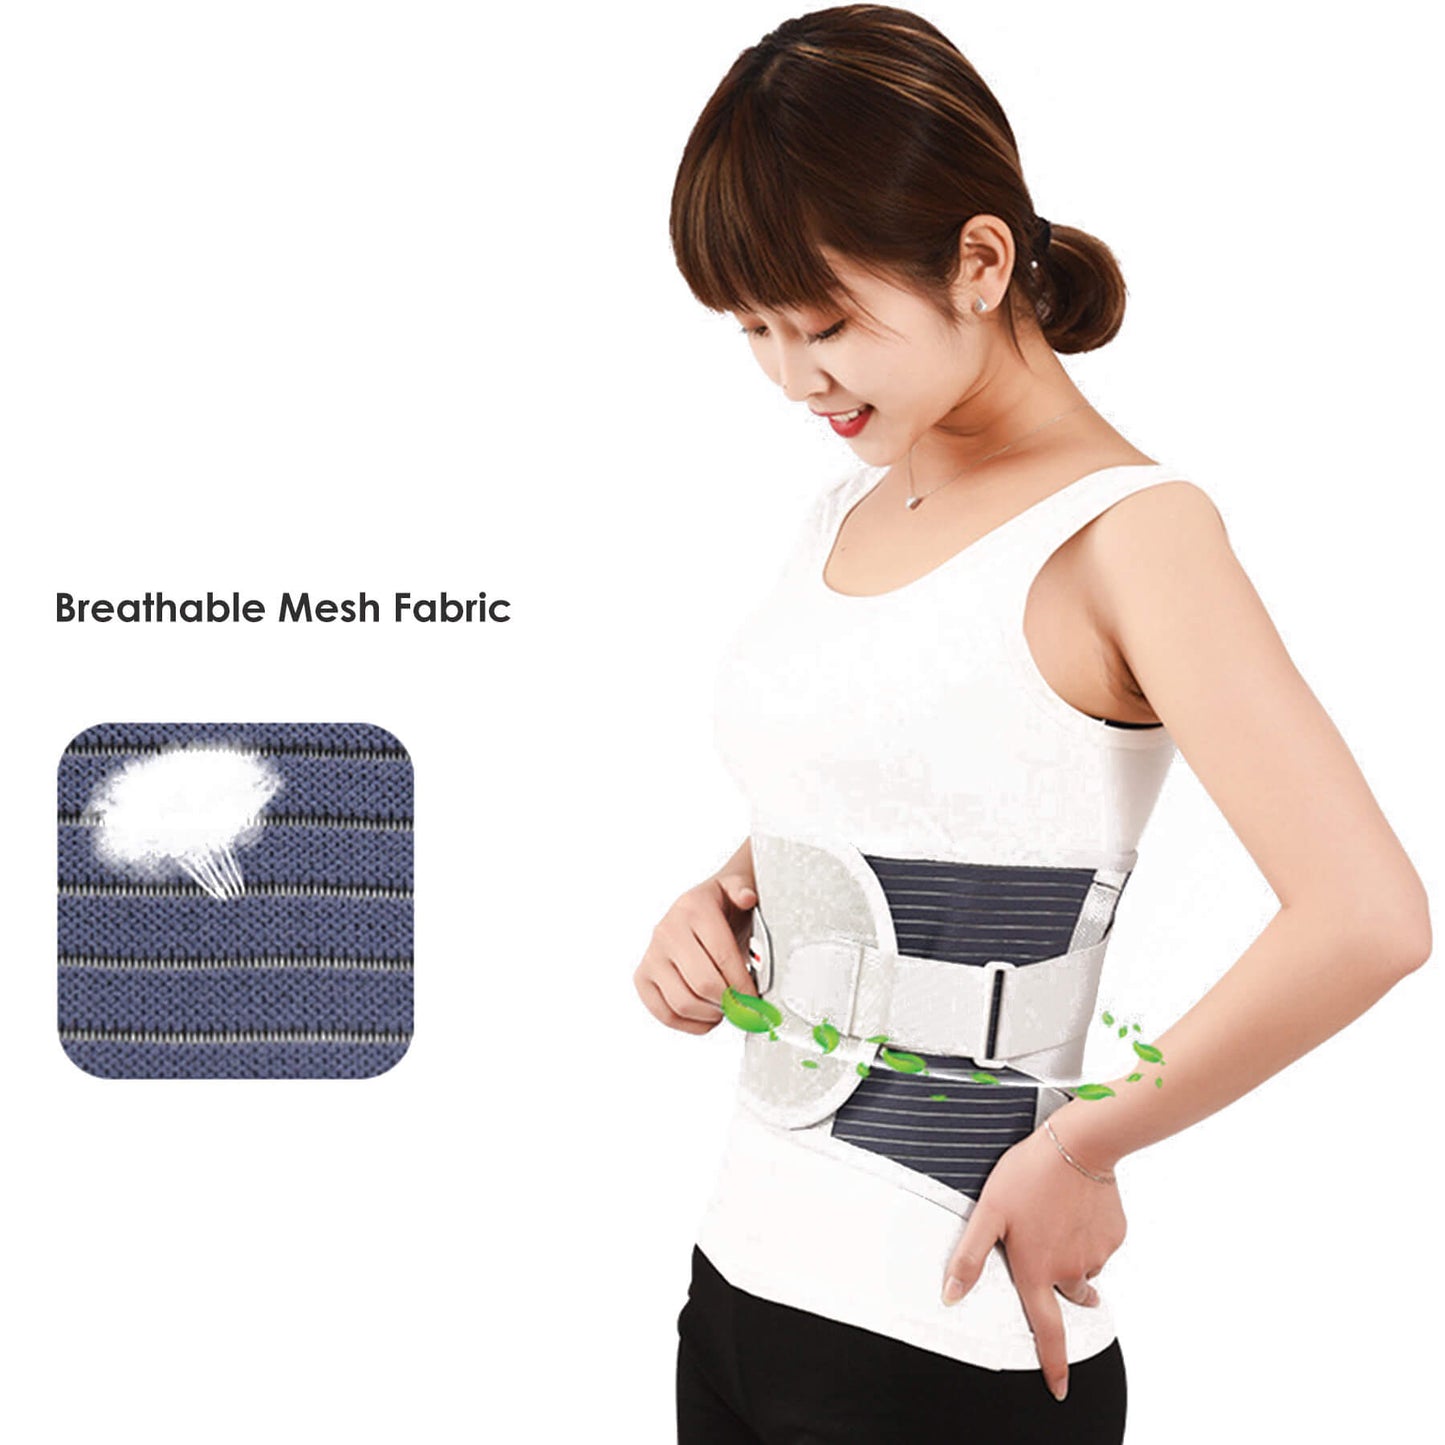 Back Brace with 6 Support Stays, Tourmaline Self-heating and Magnetic Pad for Lower Back Pain Relief